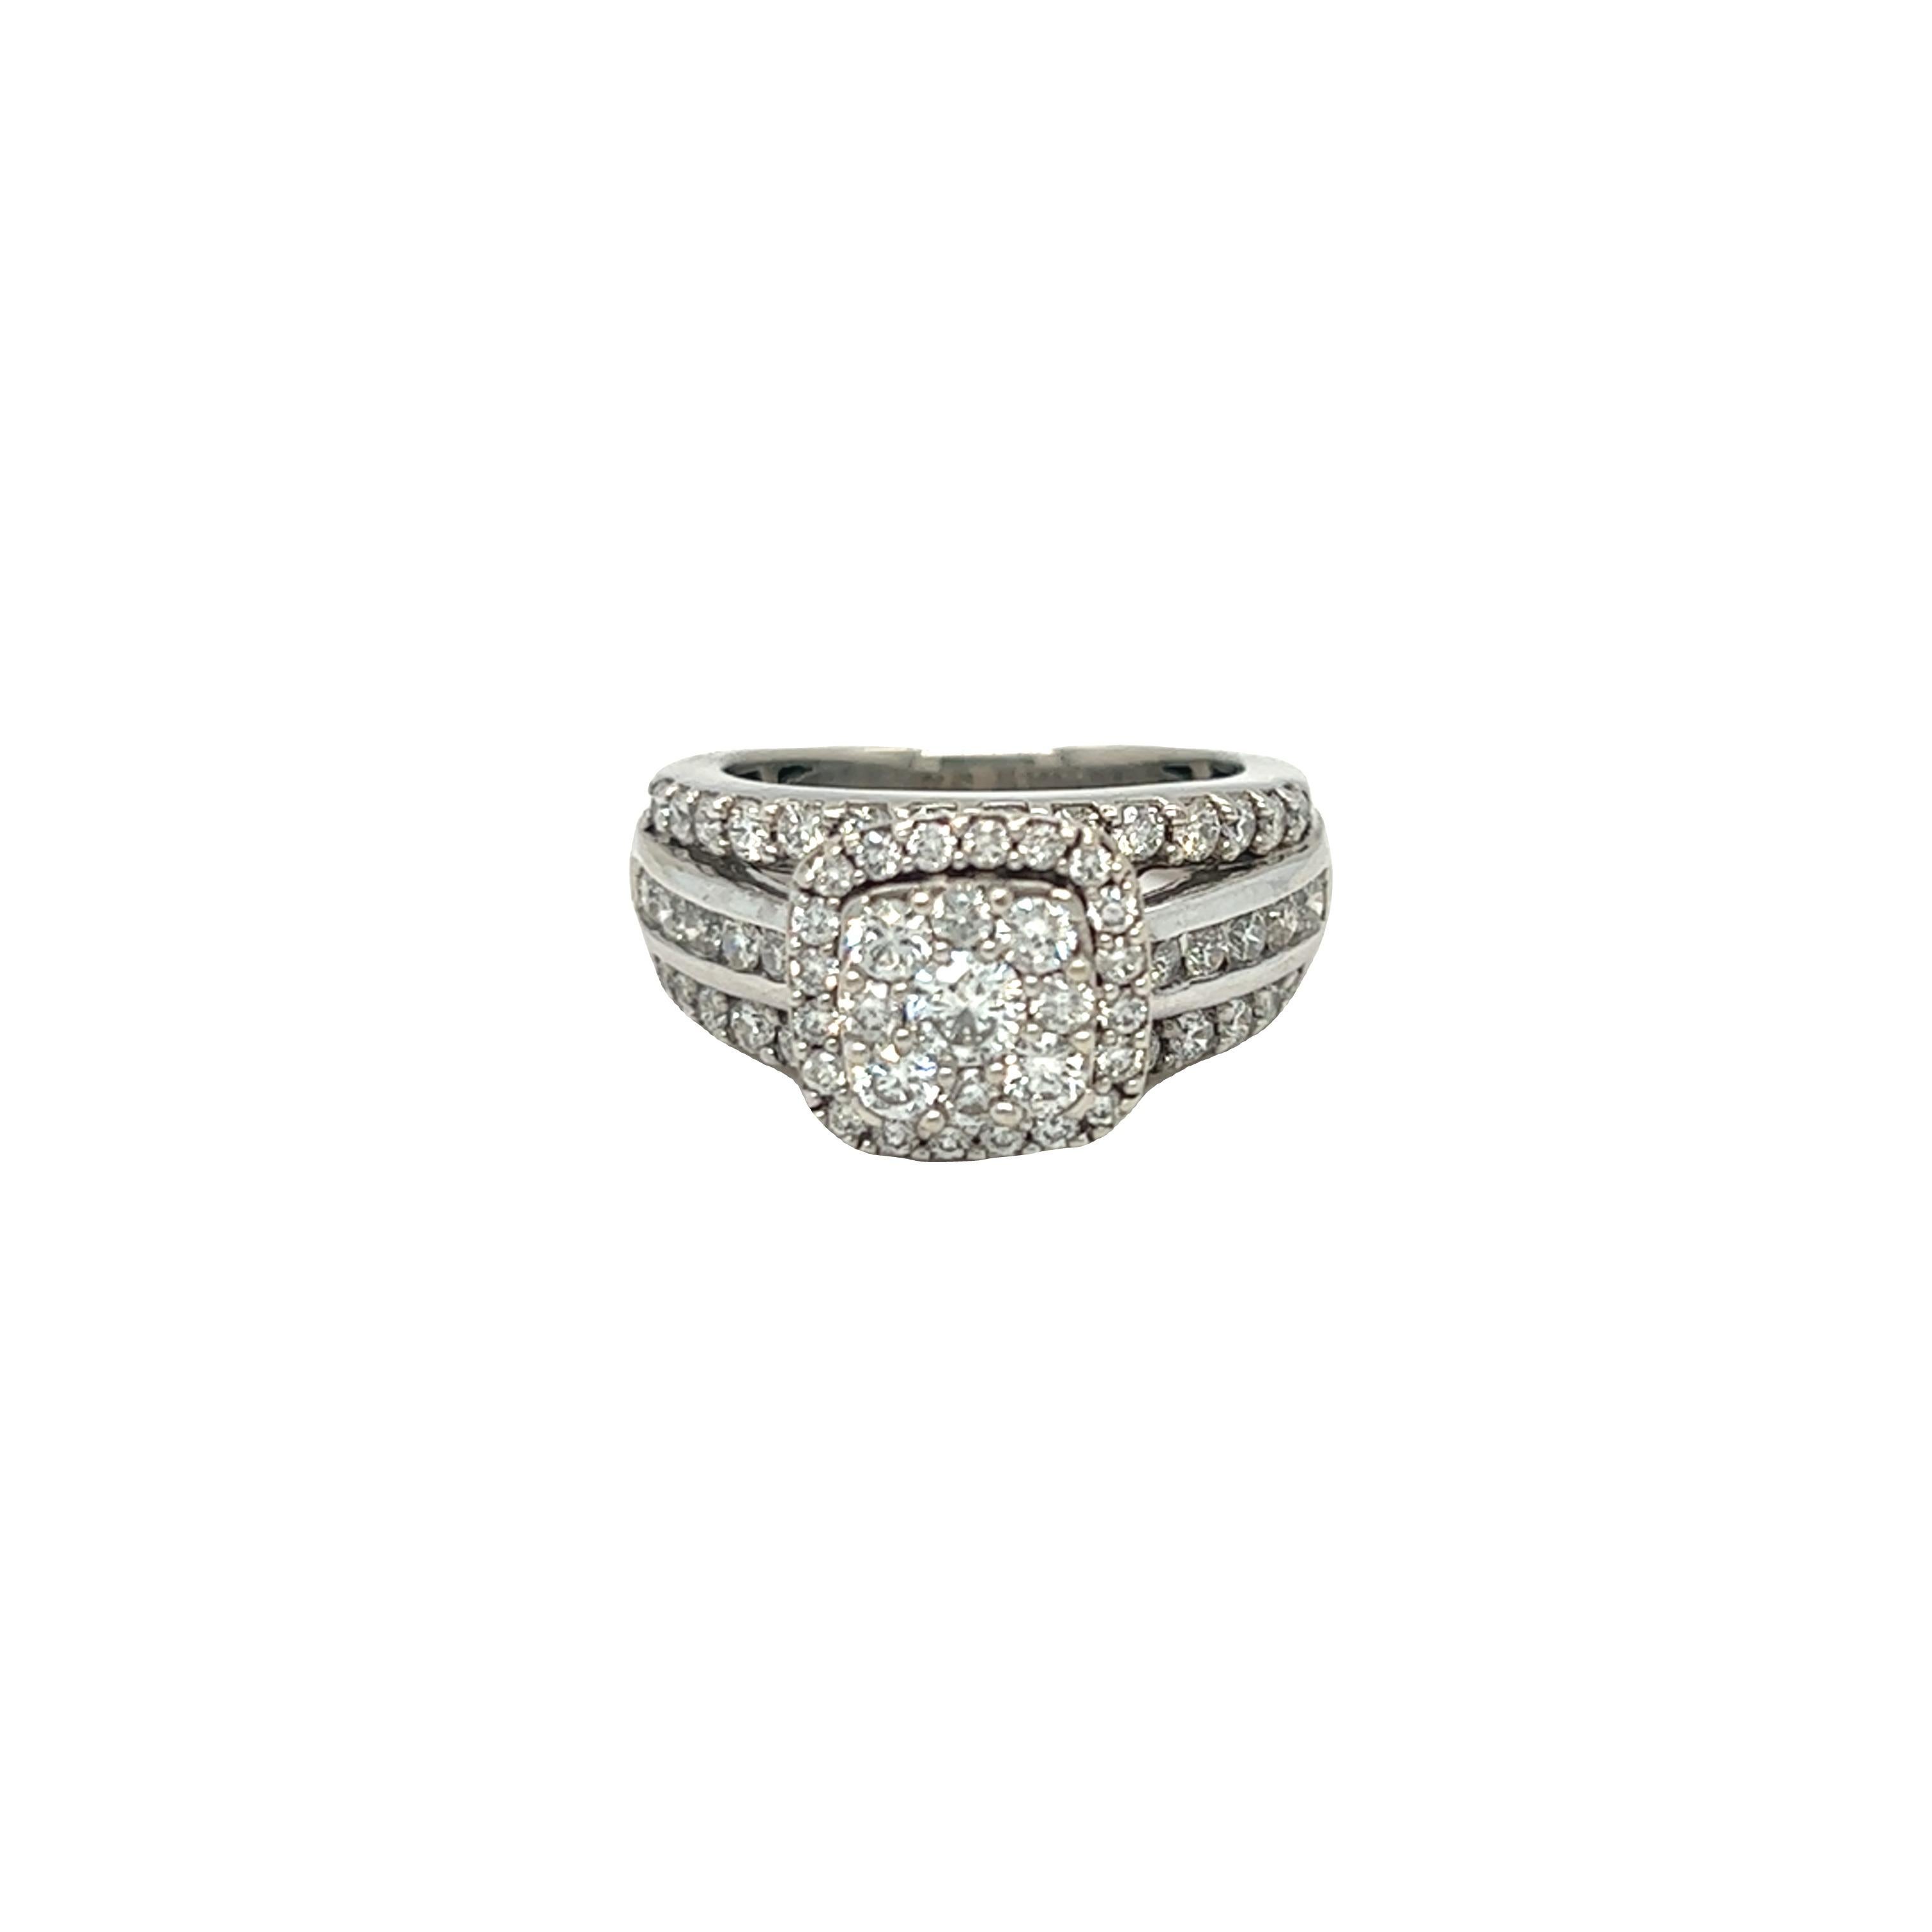 Beautiful clustered diamond engagement ring with round brilliant diamond weighing approximately 2.50 carats in total with quality of H color and SI clarity. The ring is crafted in 14K white gold with wide split shank giving an illusion of stacked